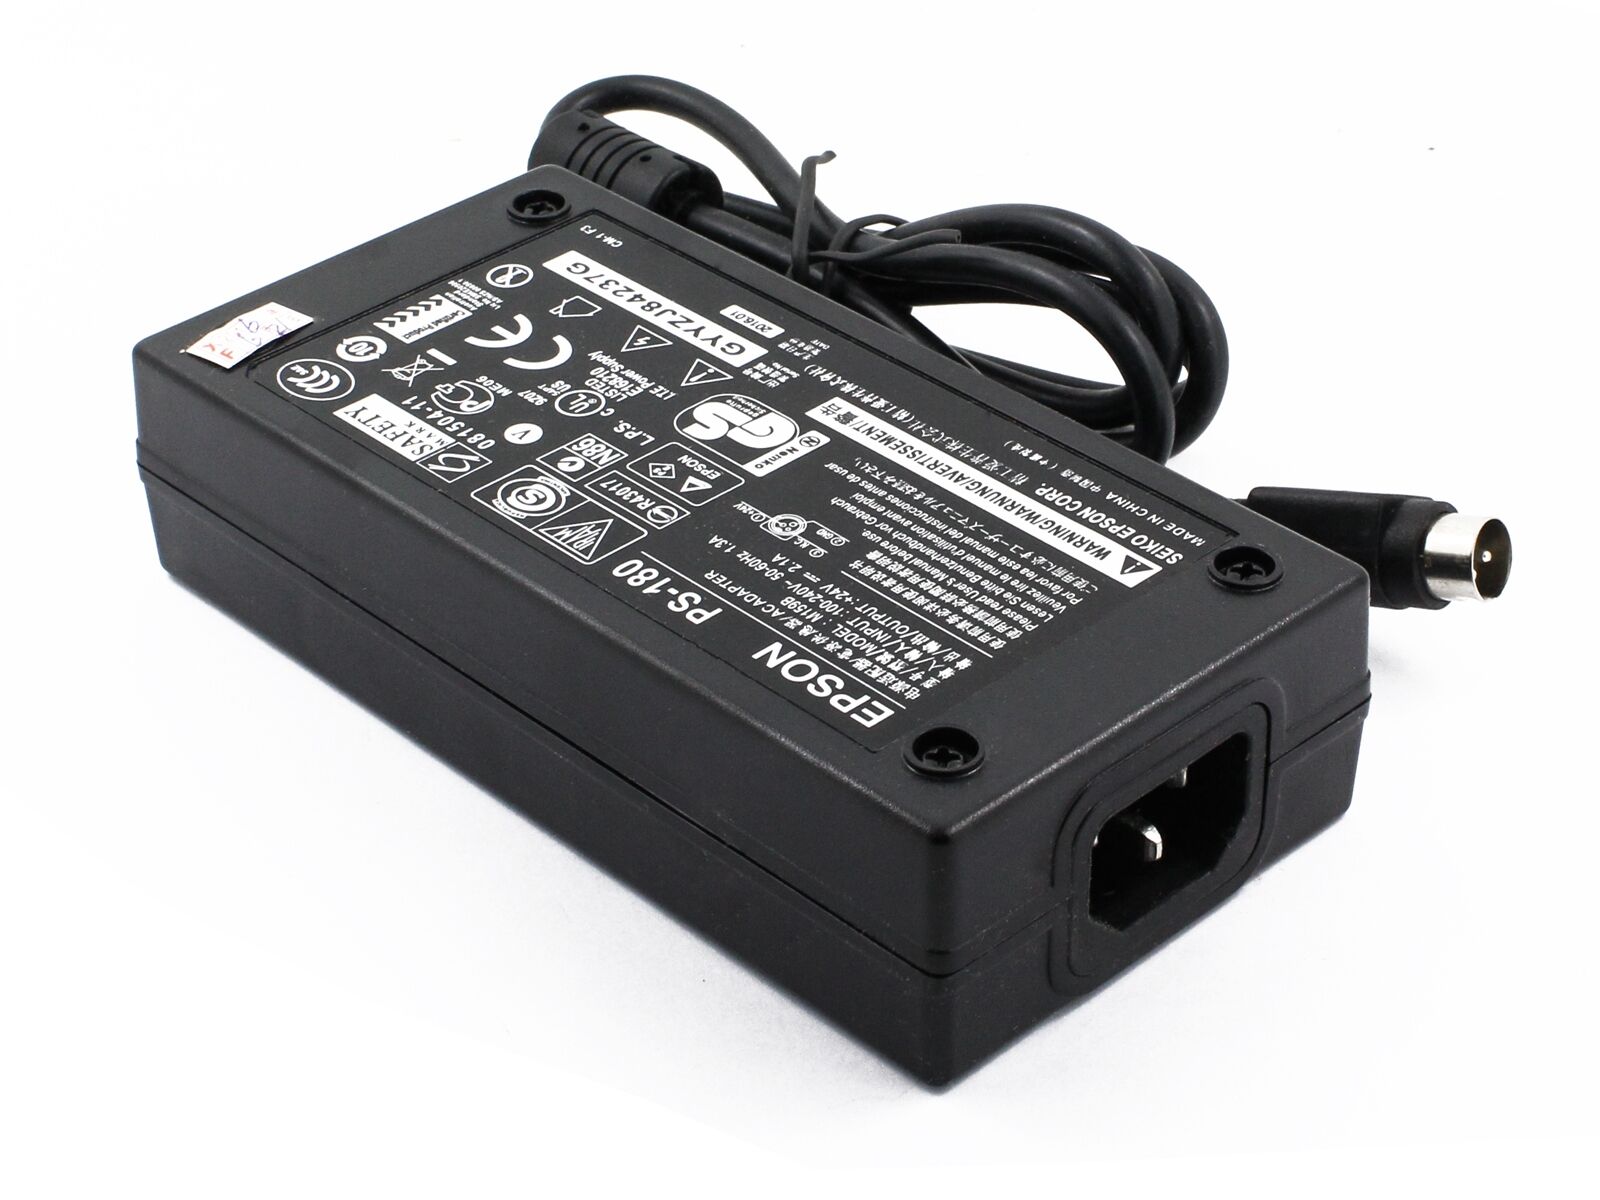 NEW Epson PS-180 AC Adapter Power Supply M159B M159A Printers C8255343 US Compatible Brand: For Epson Type: PS-180 A - Click Image to Close